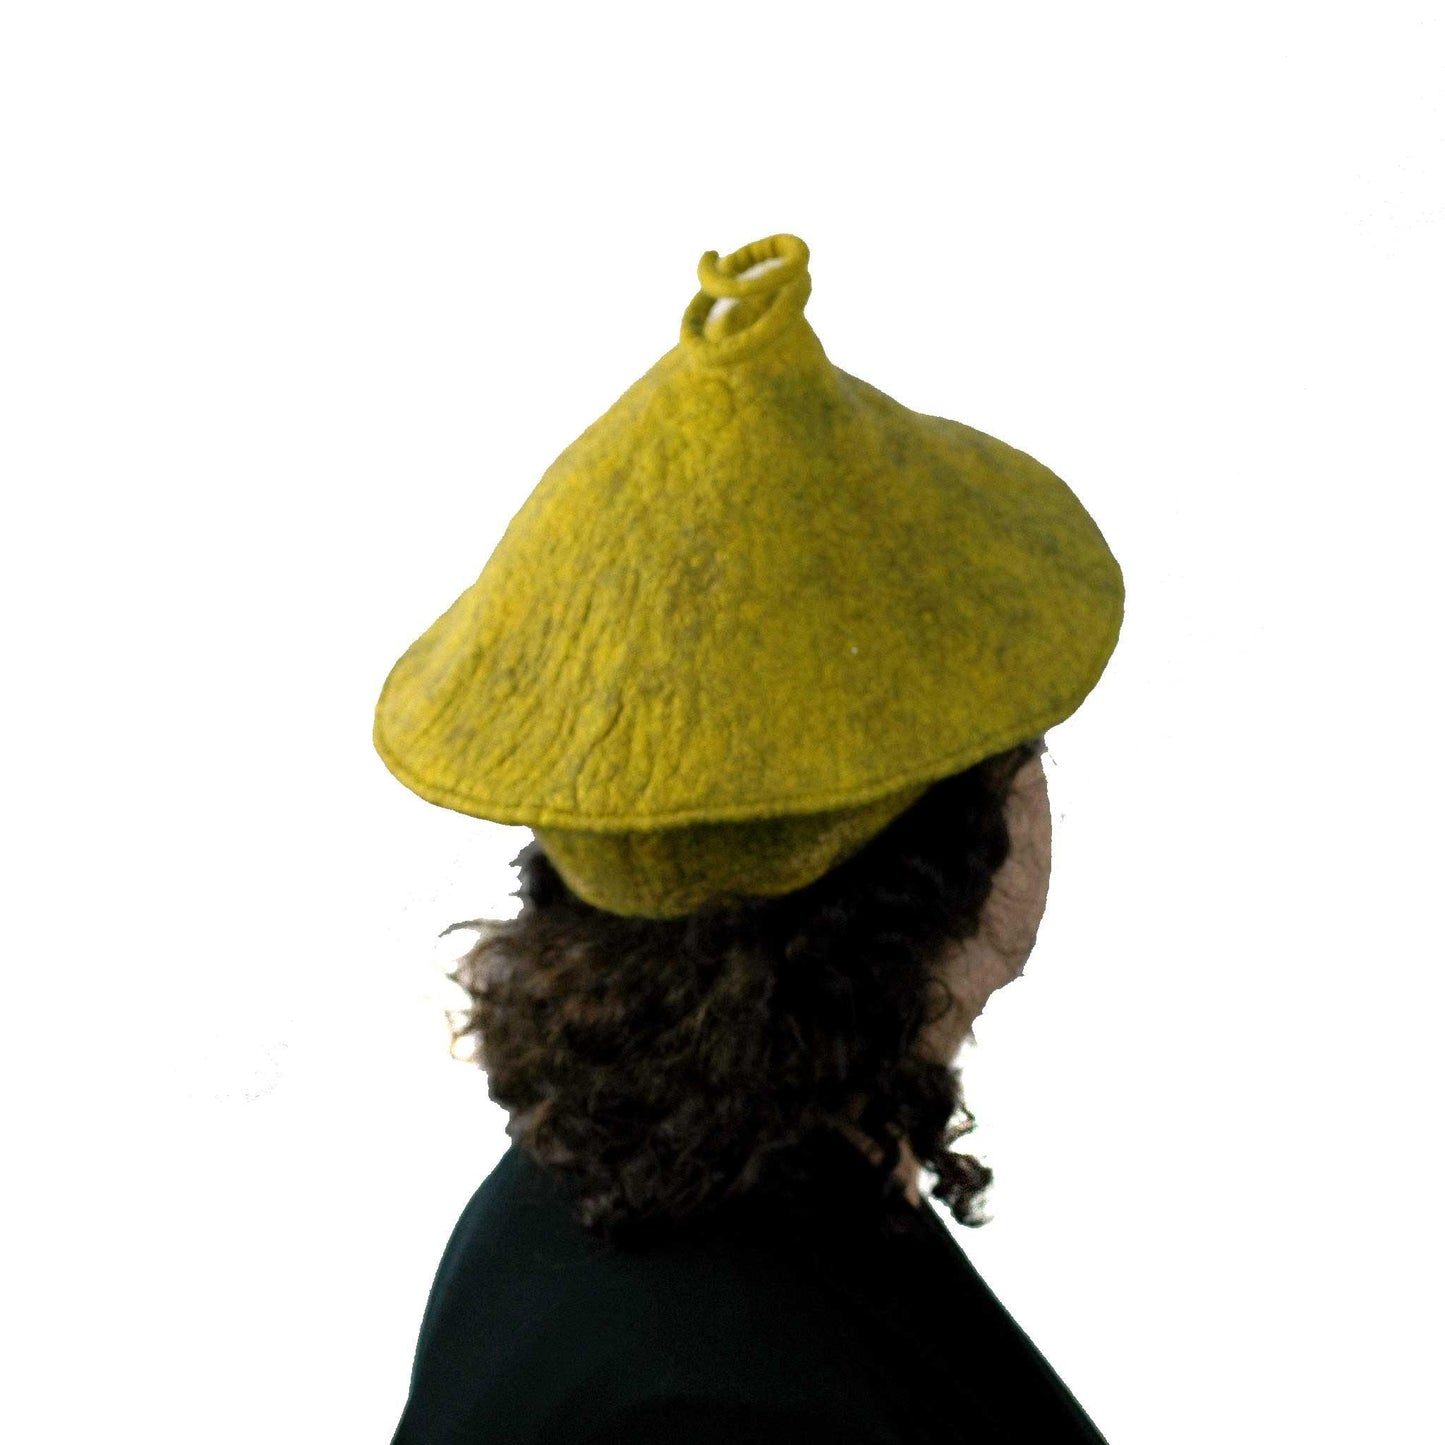 Conical Hat in Mustard Yellow - Medium Small Size  - back view